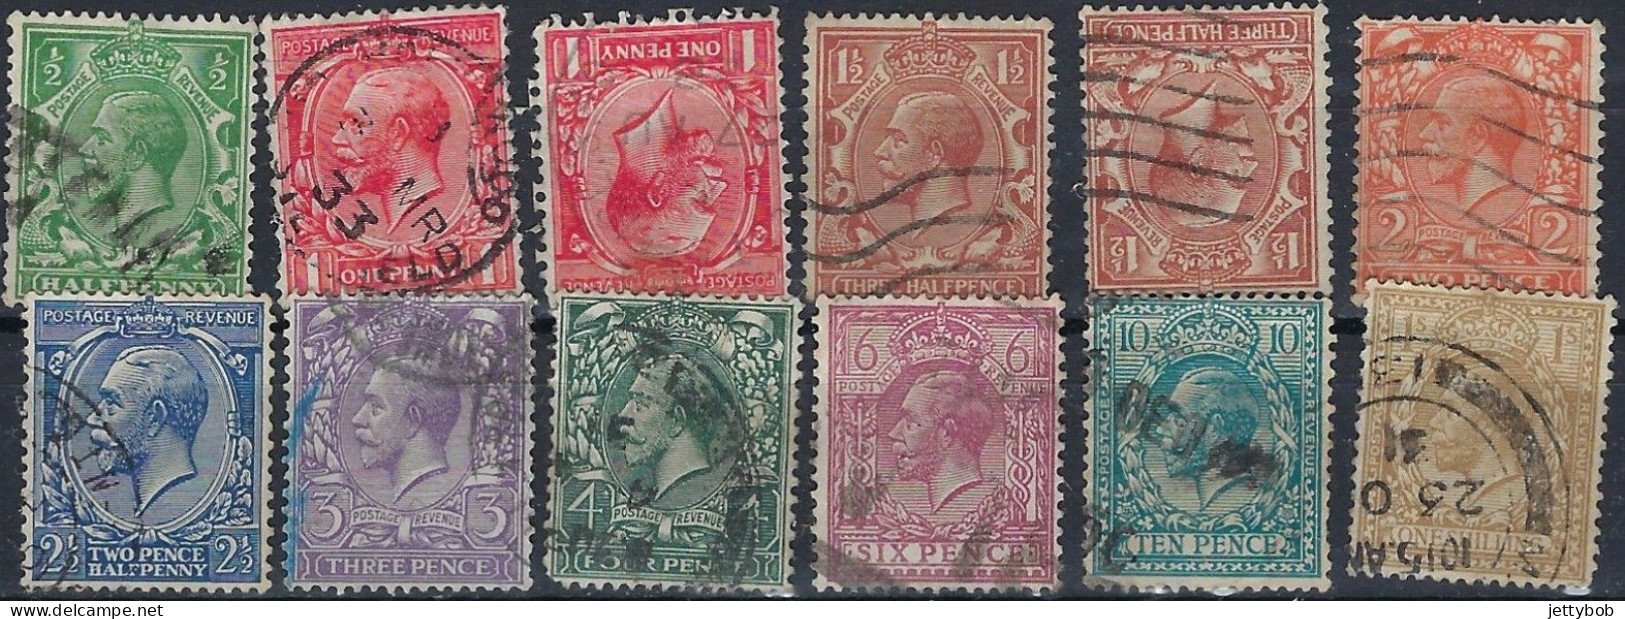 GB 1924 GV Definitives Wmk: Block Cypher 10 Values + 2 Inverted Watermarks Used - Gebraucht